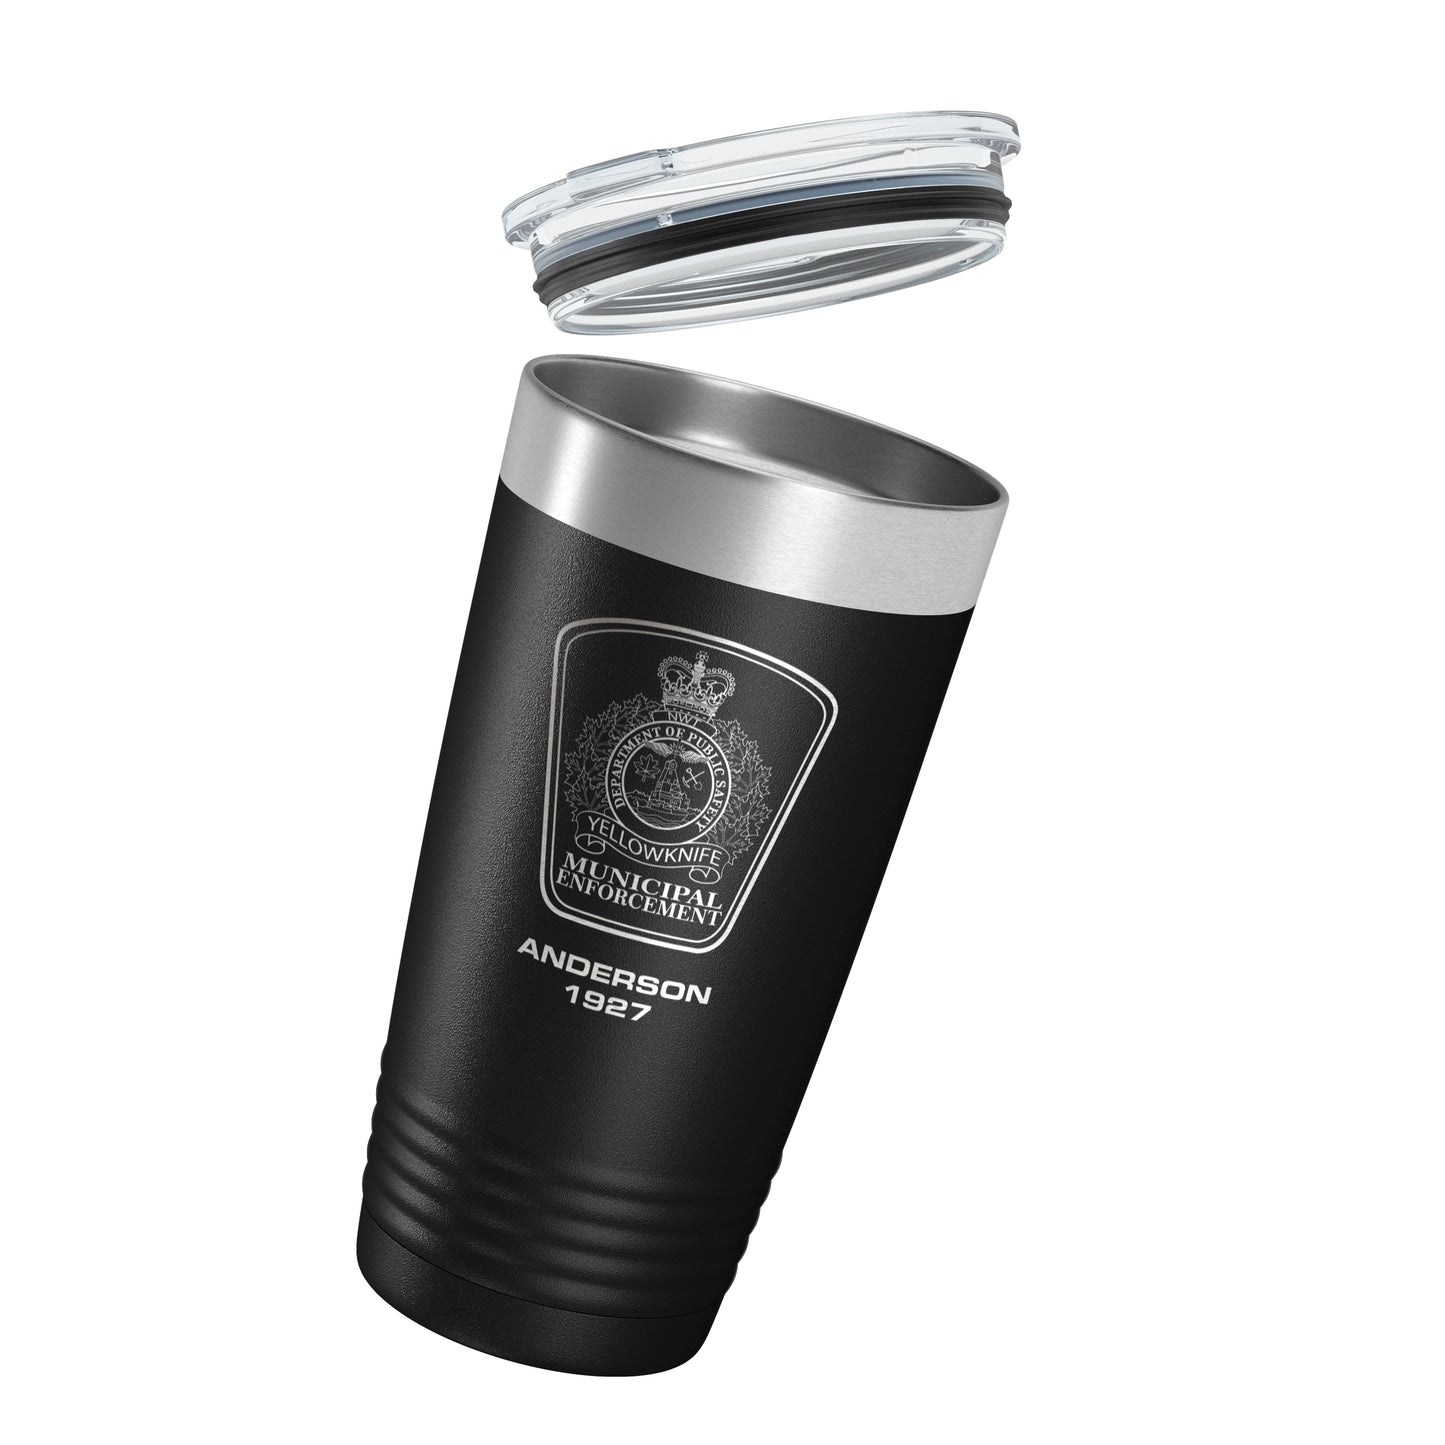 Yellowknife Peace Officer Black Vacuum Insulated Tumbler